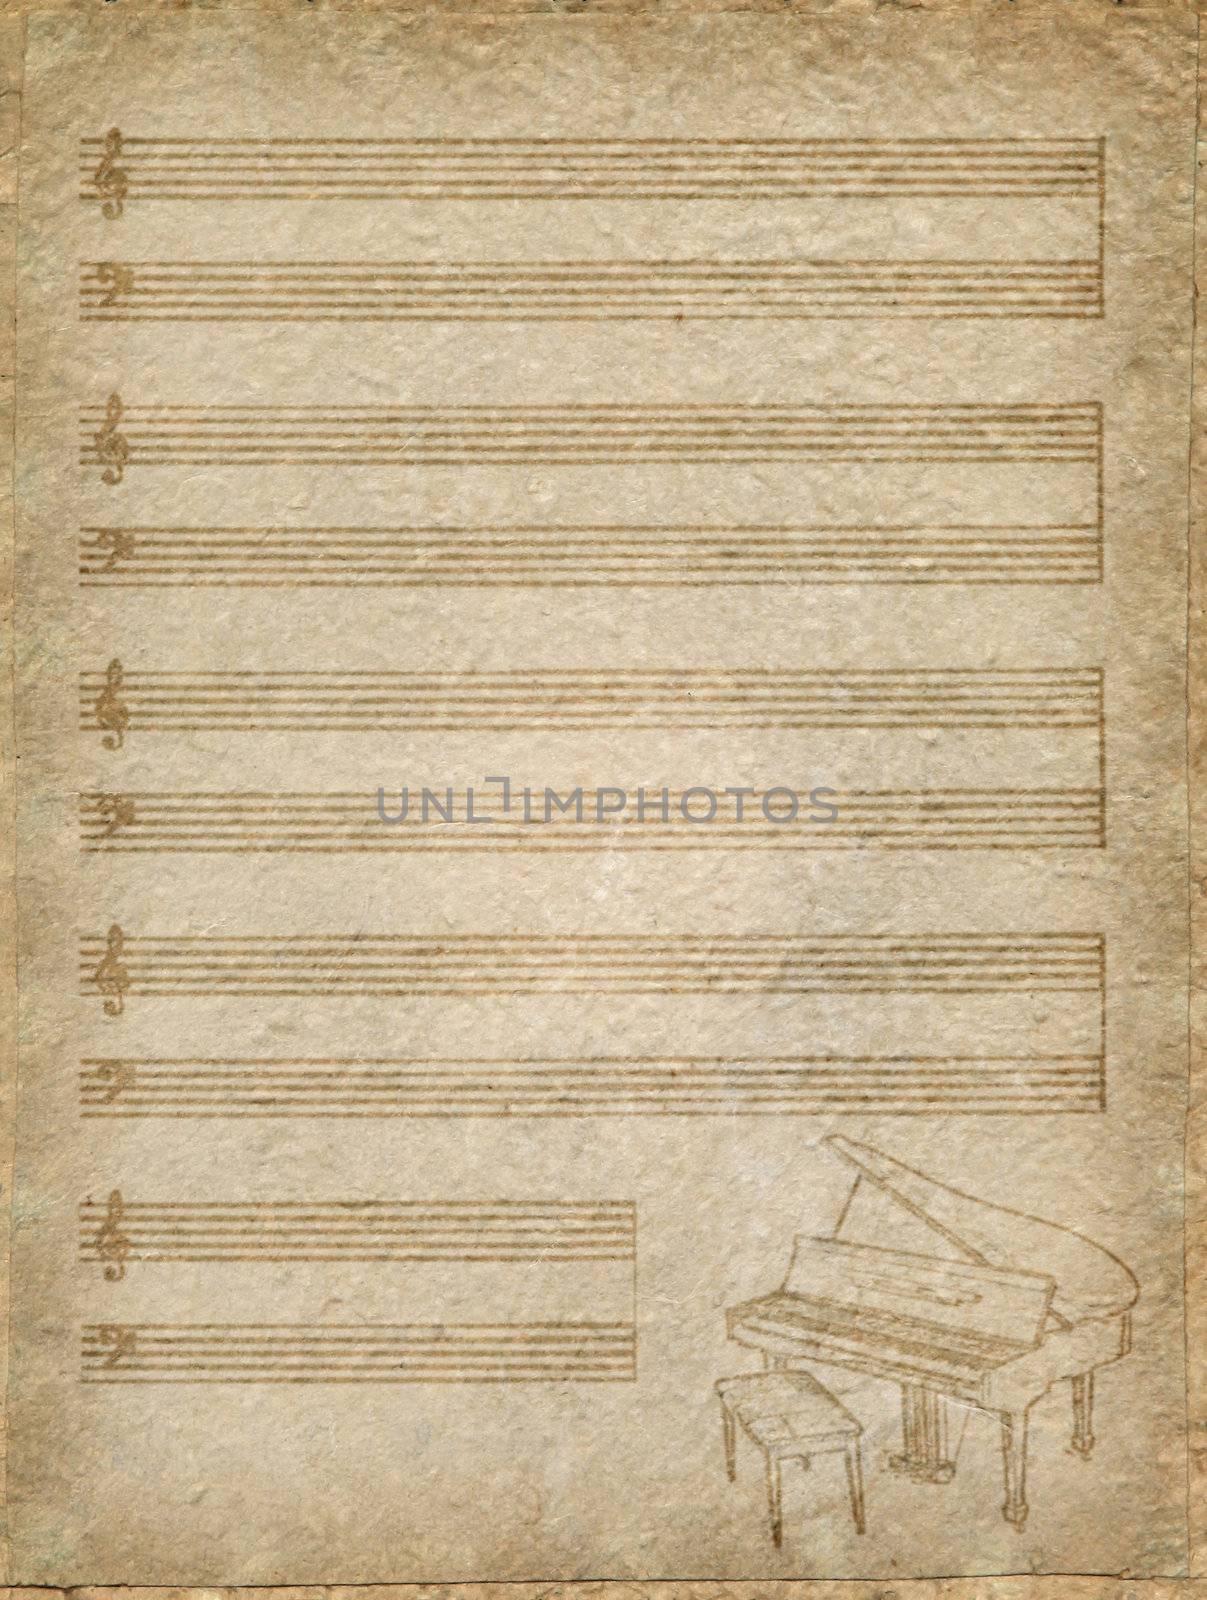 vintage music Paper with grand piano